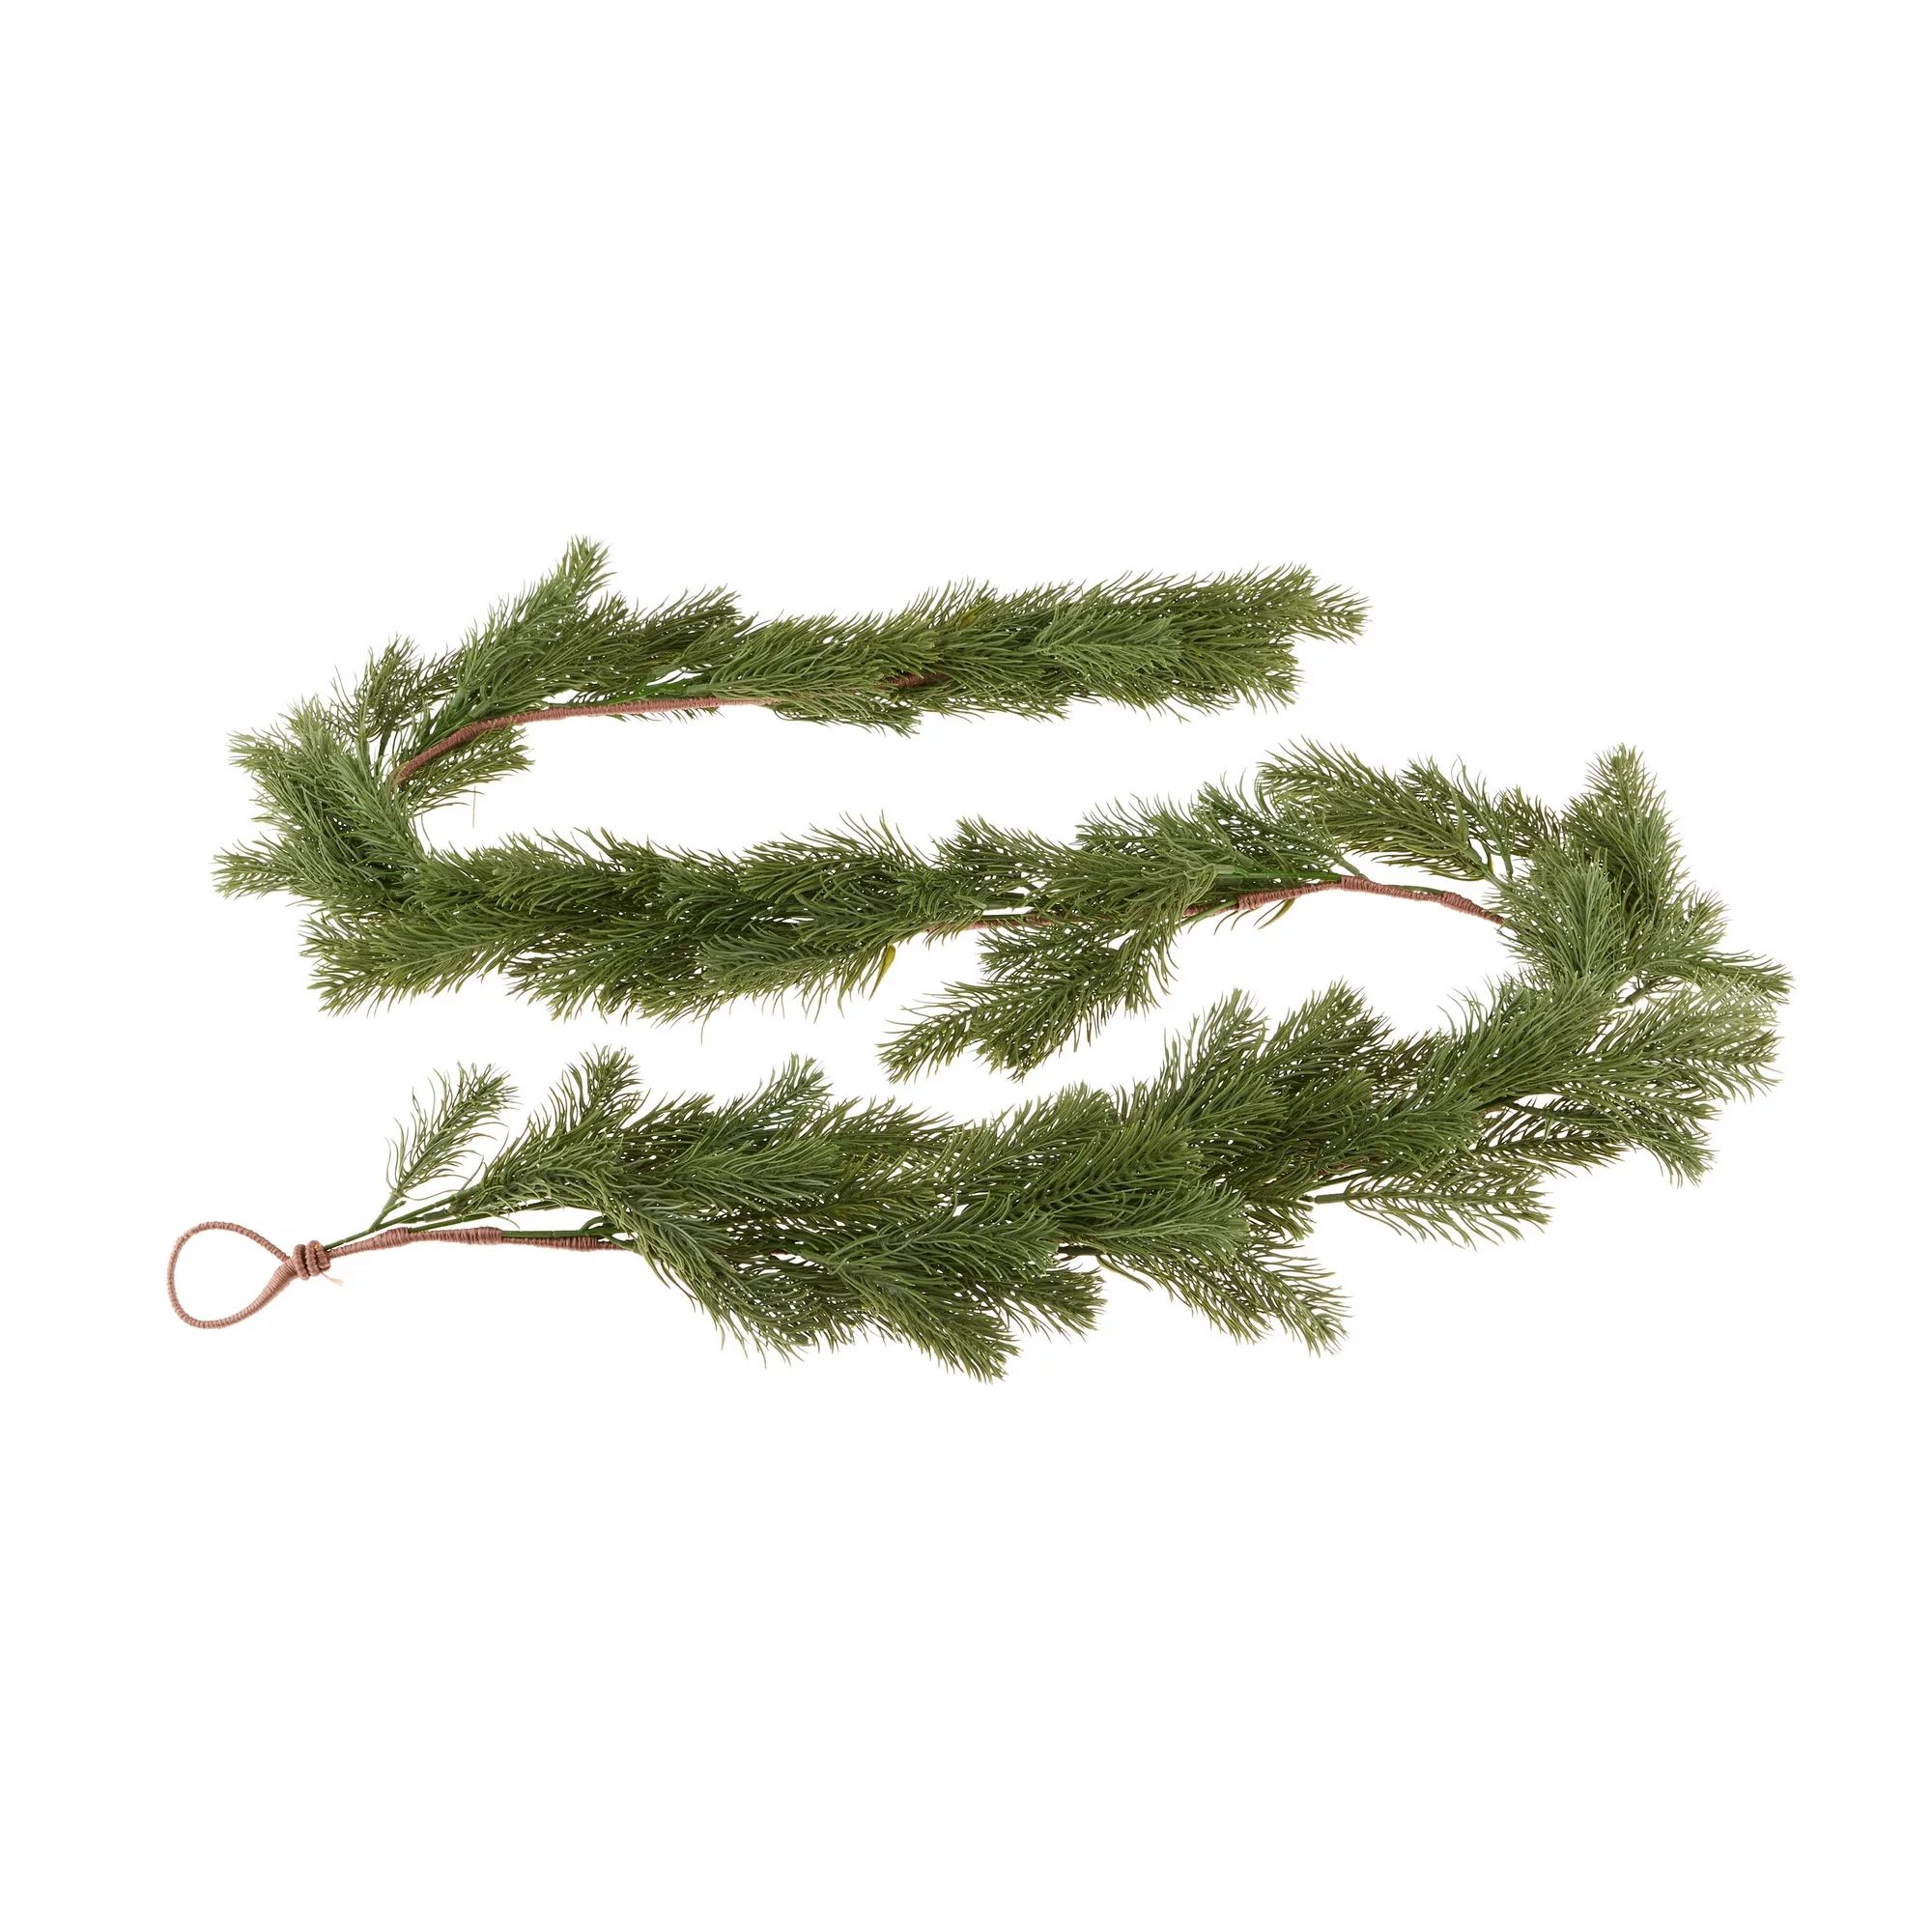 Artificial Greenery Christmas Garland, 6', by Holiday Time | Walmart (US)